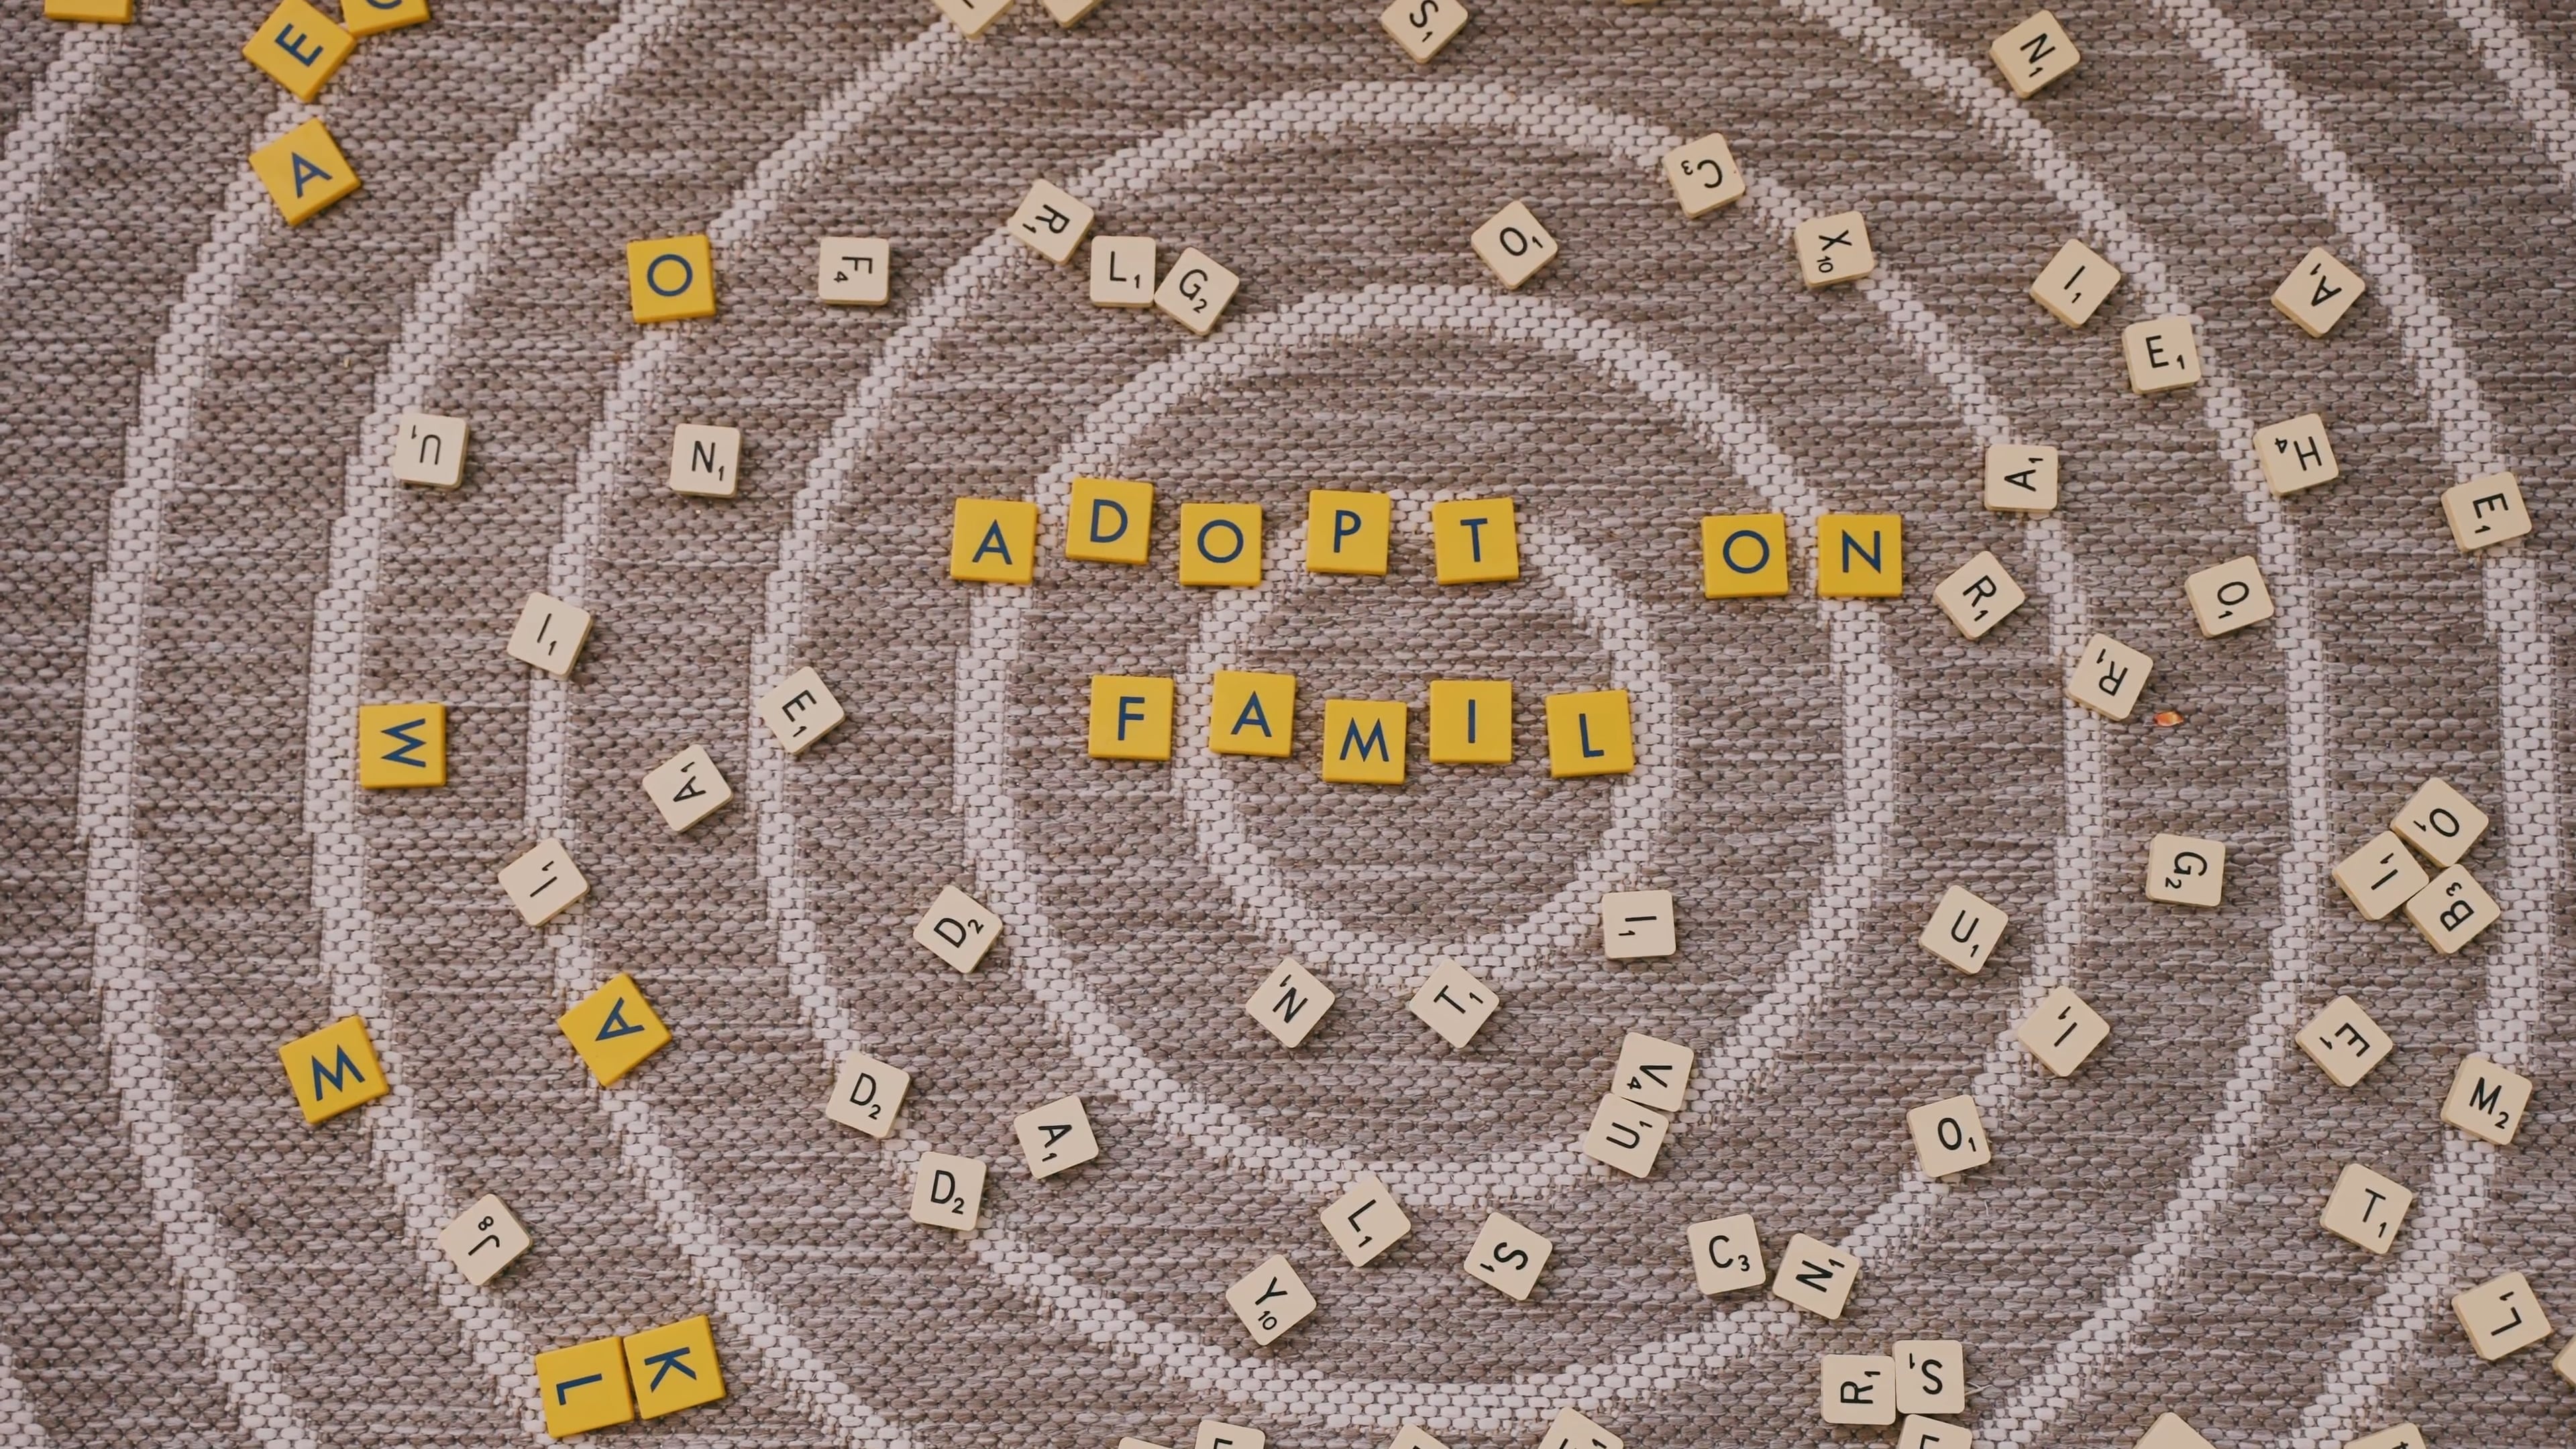 Scrabble: White and yellow letter tiles on the brown carpet, Equipment for a family game. 3840x2160 4K Background.